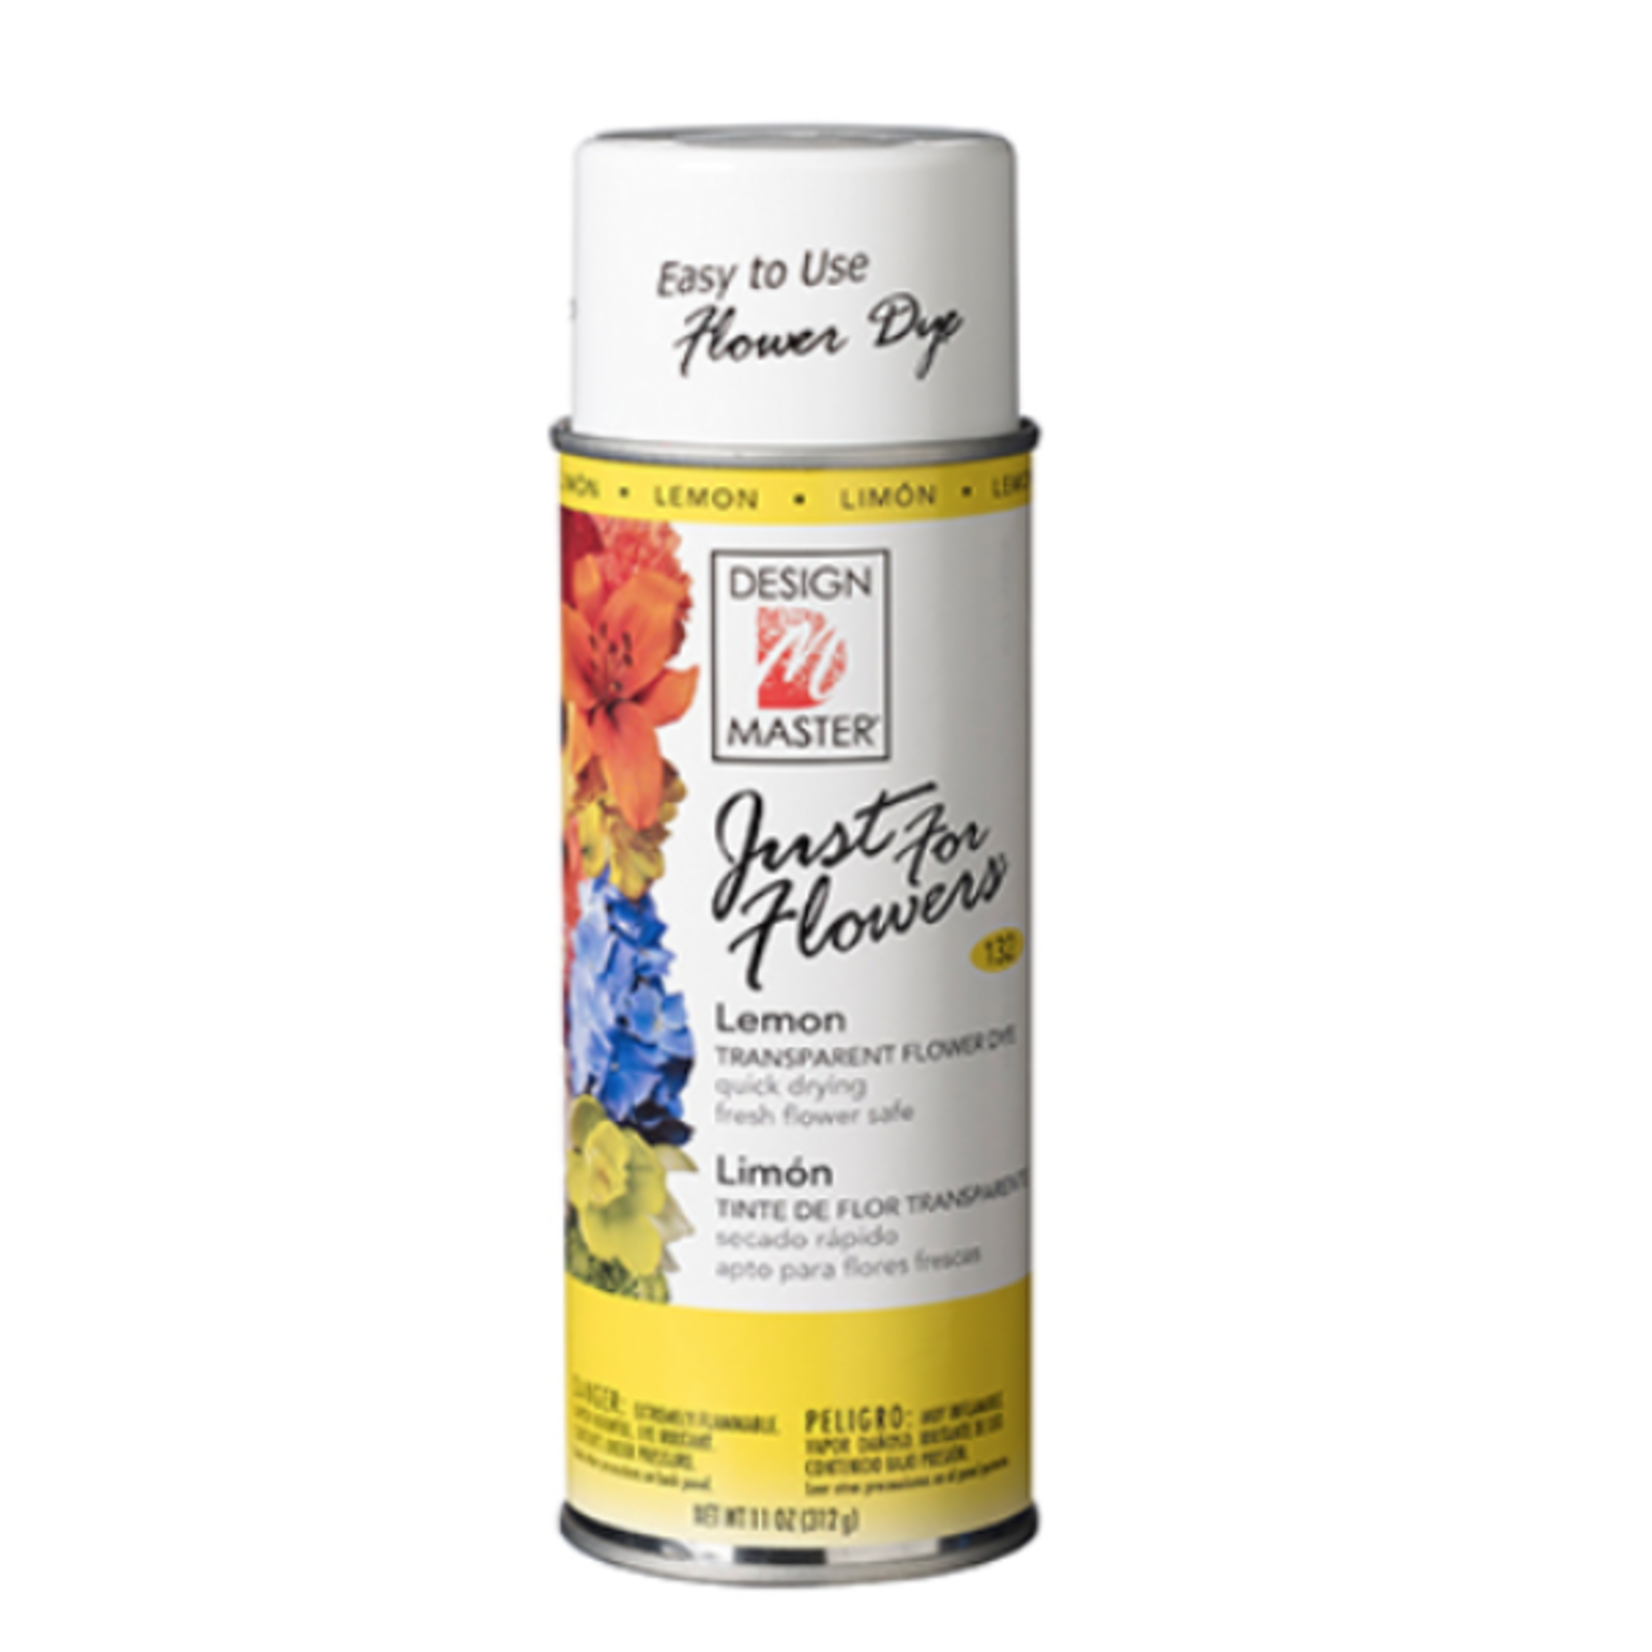 40% off was $14 now $8.39. 132 Just For Flowers lemon